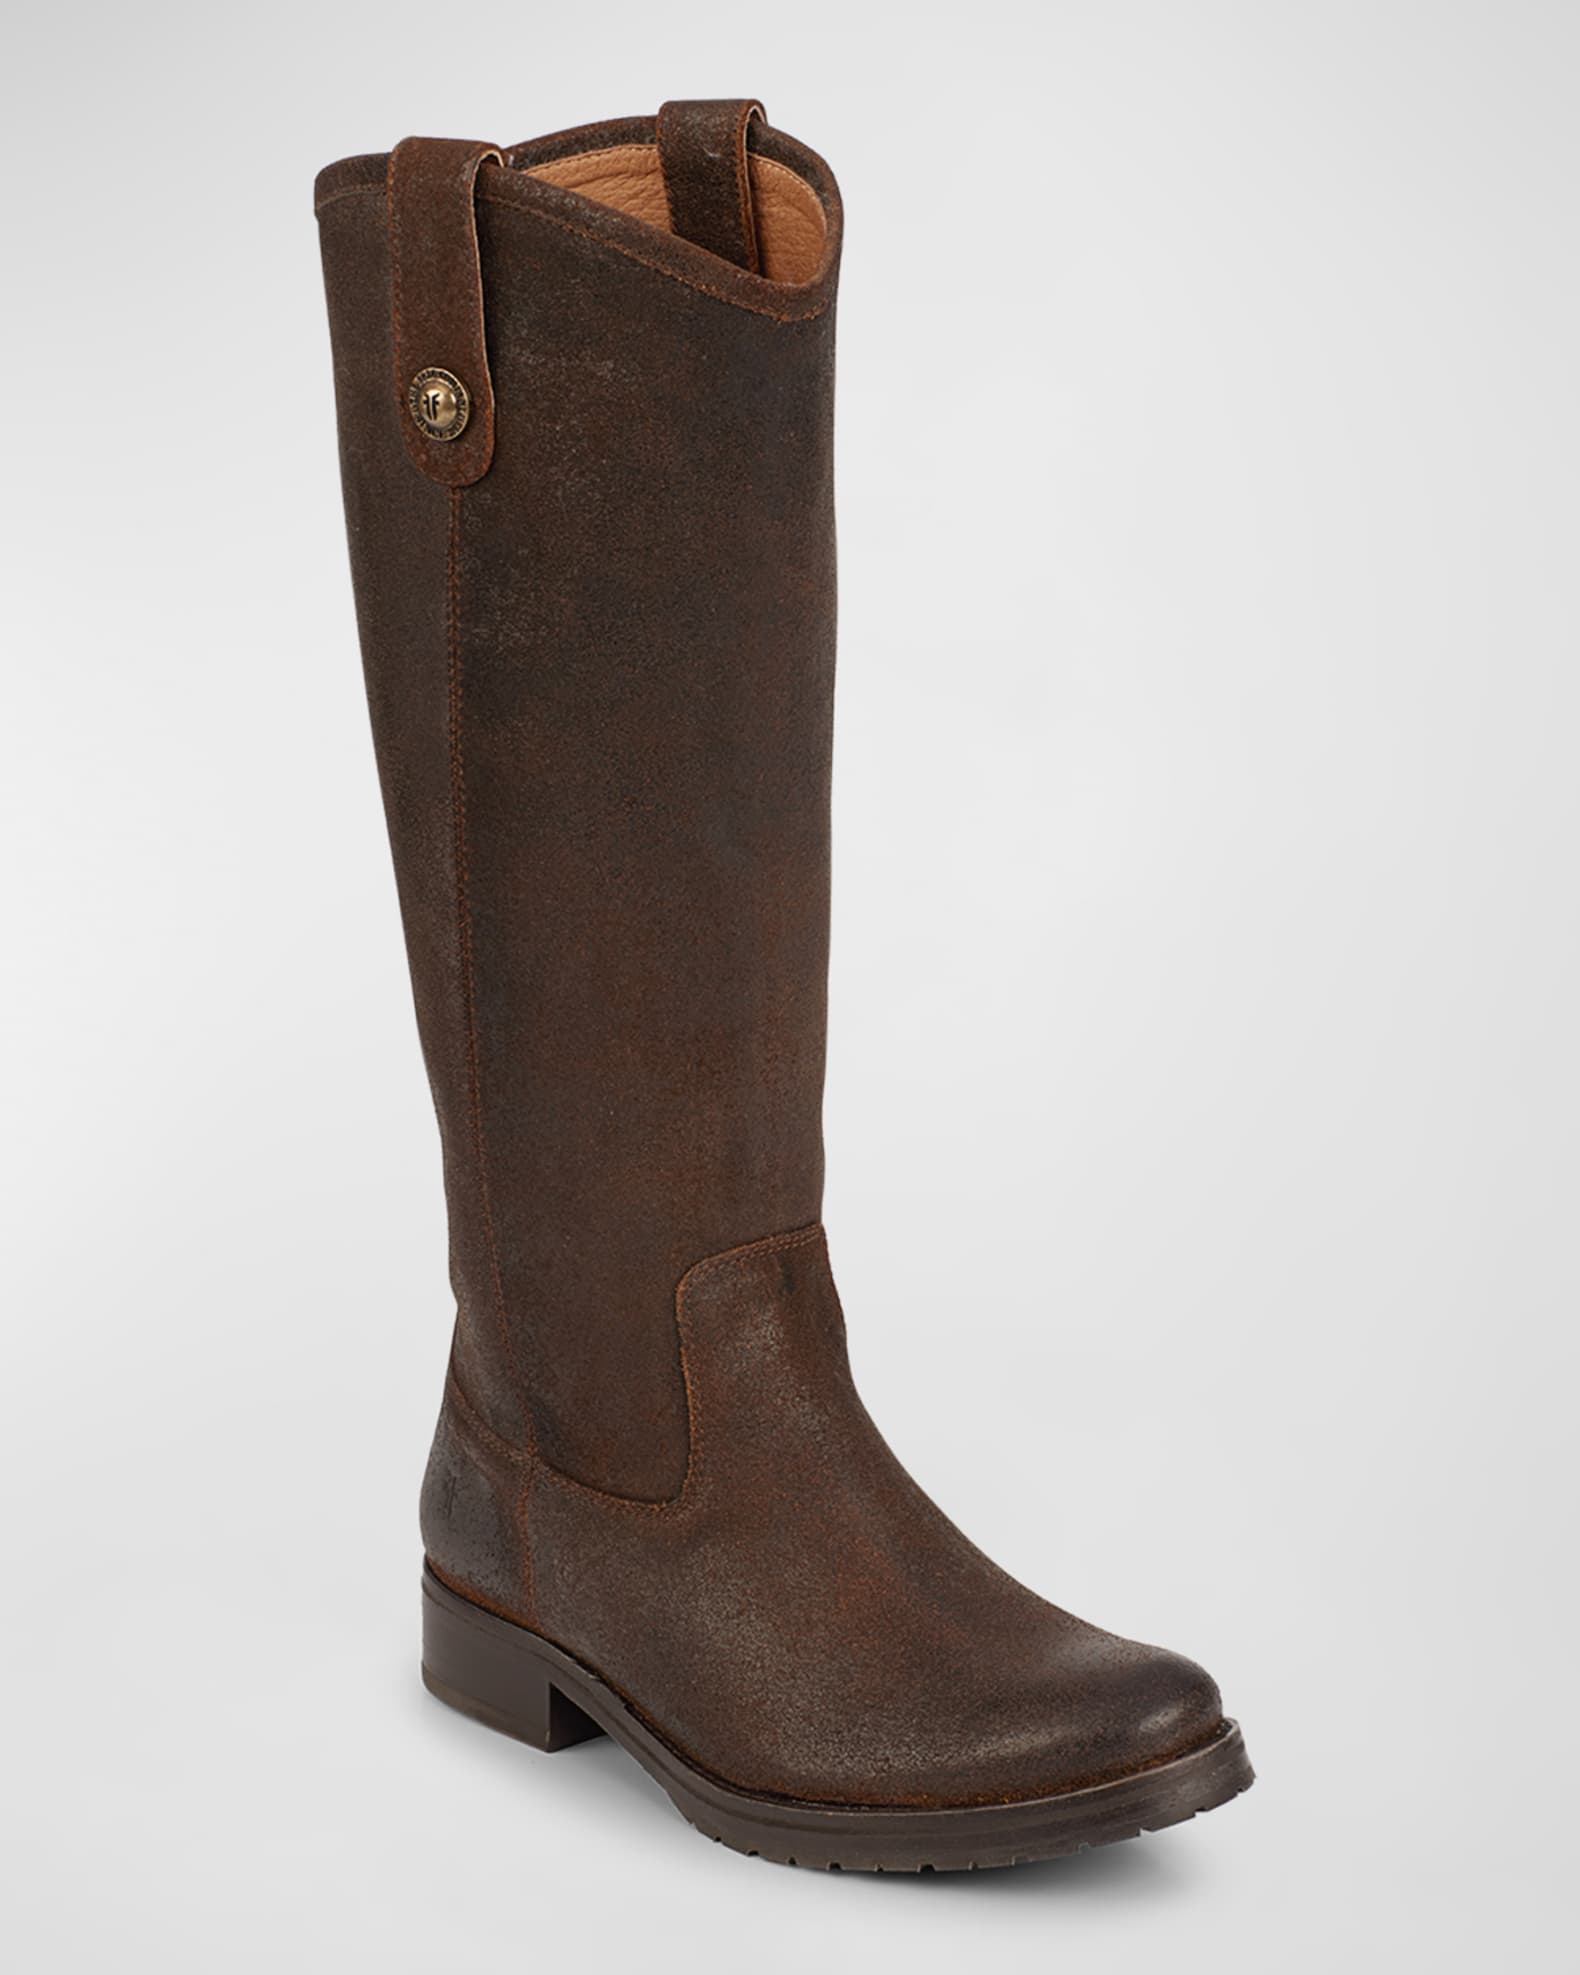 Frye Melissa Leather Tall Riding Boots | Neiman Marcus